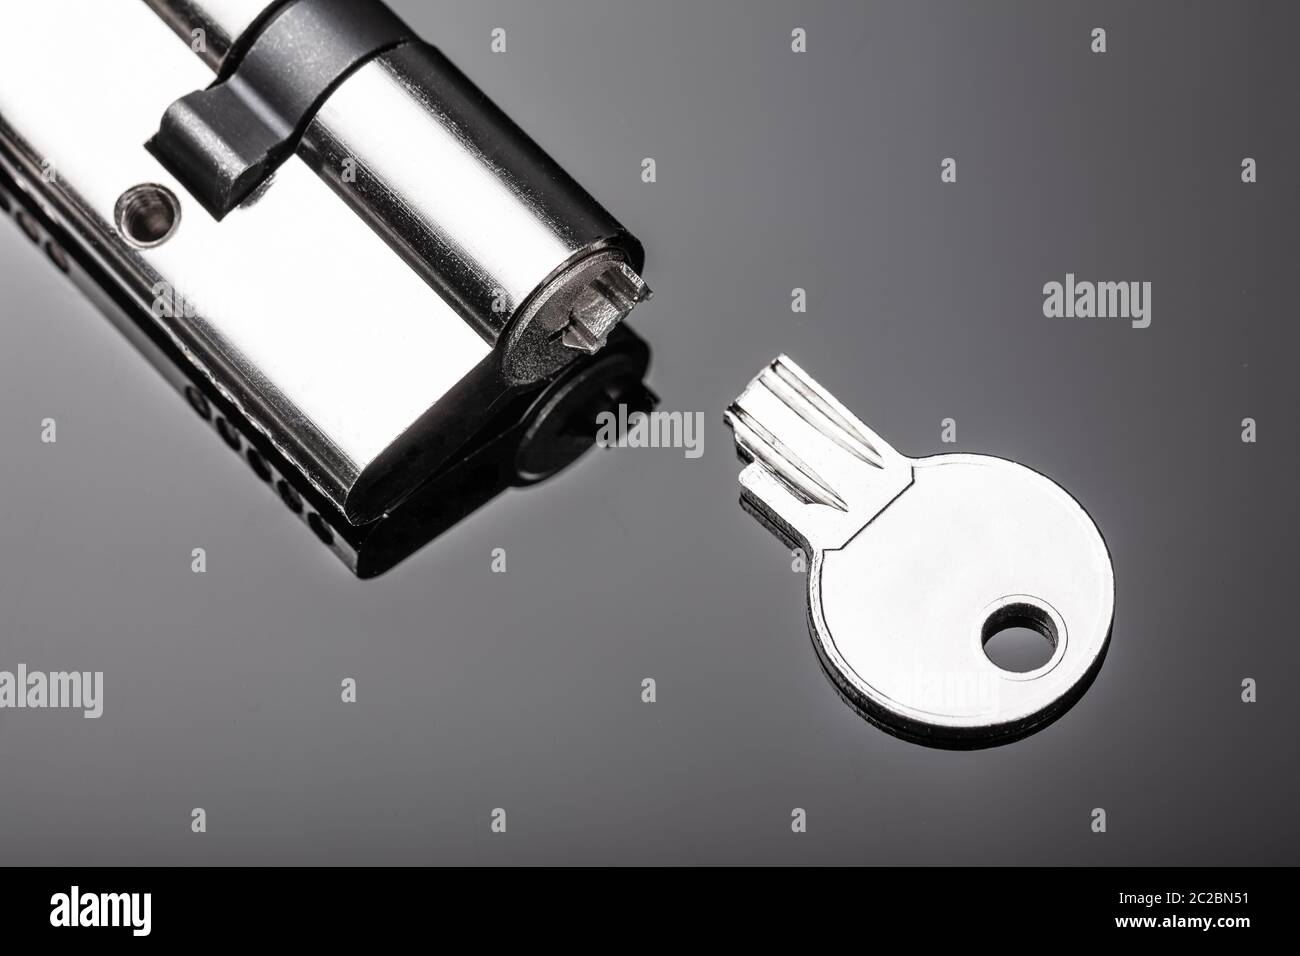 Close-up Of Pin Tumbler Of Cylinder Lock With Broken Key On Reflective Desk Stock Photo